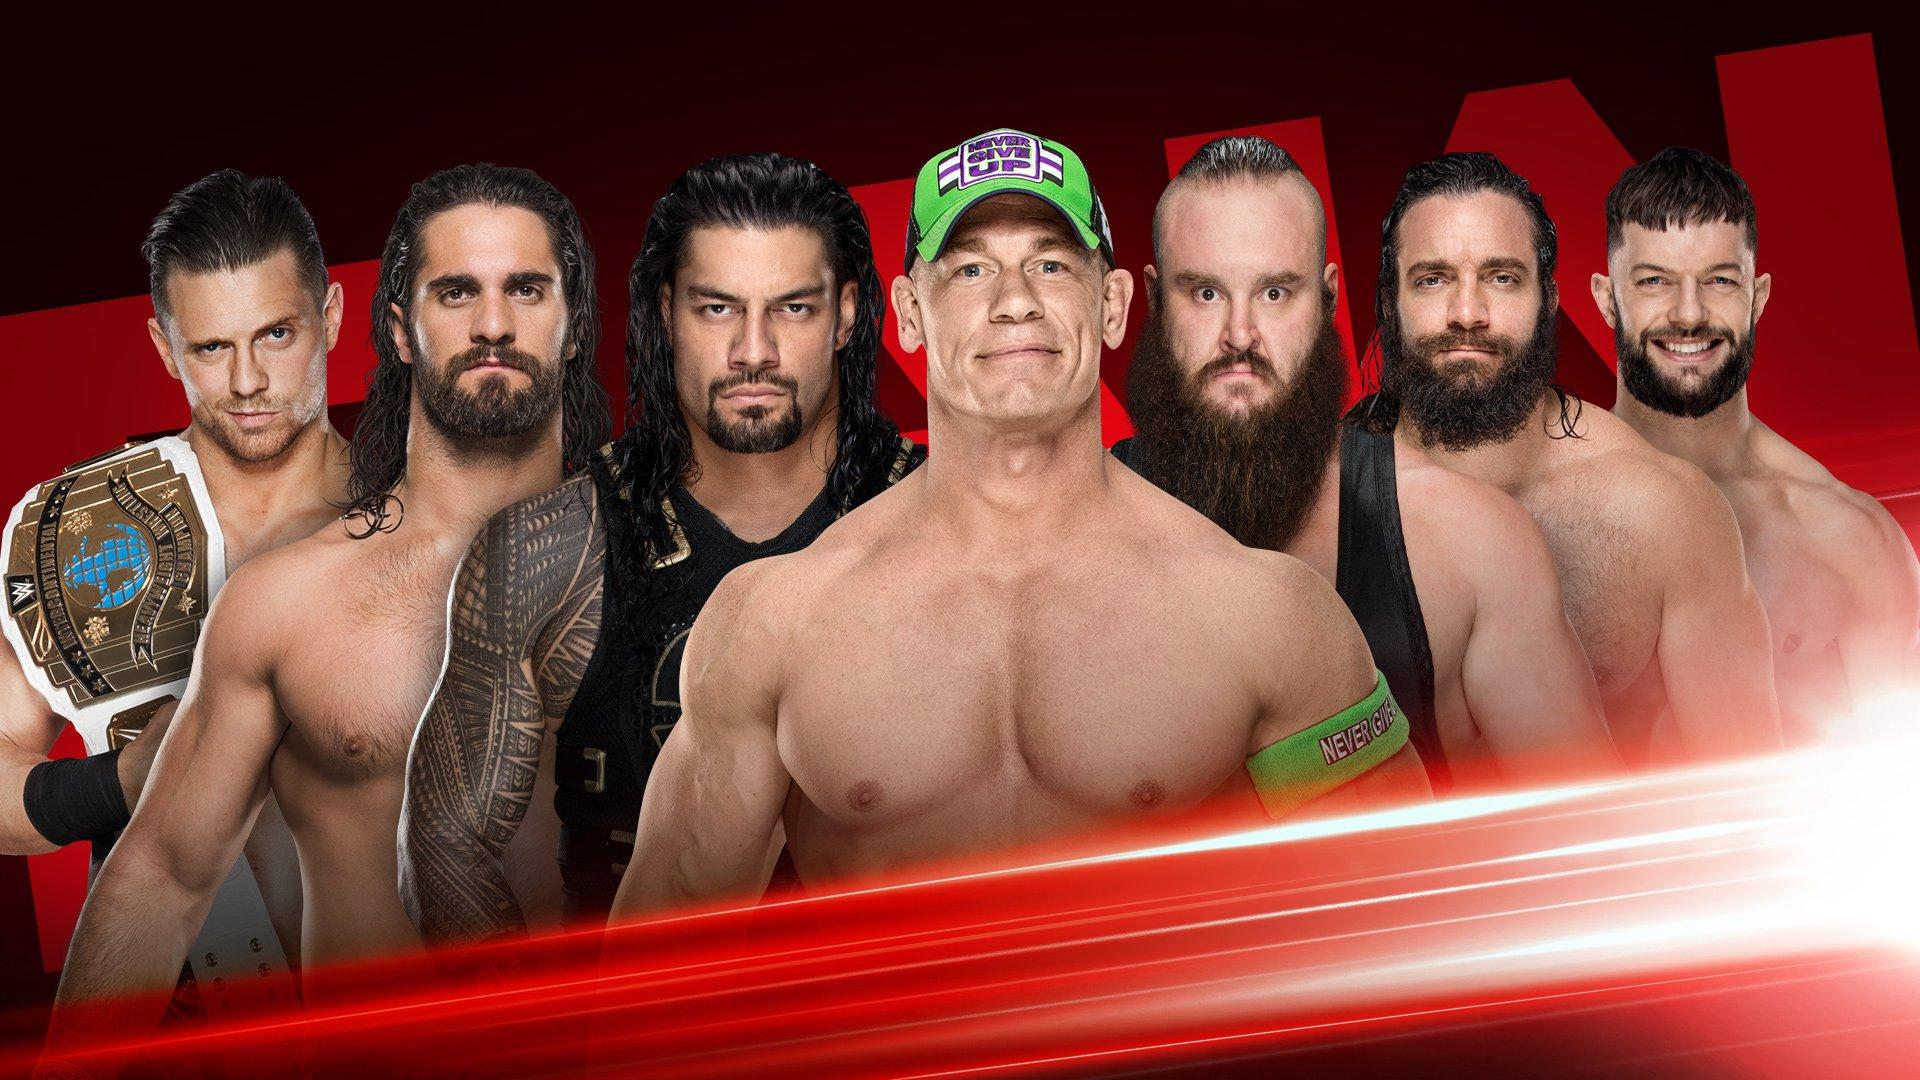 What to Expect on the February 19th Episode of RAW